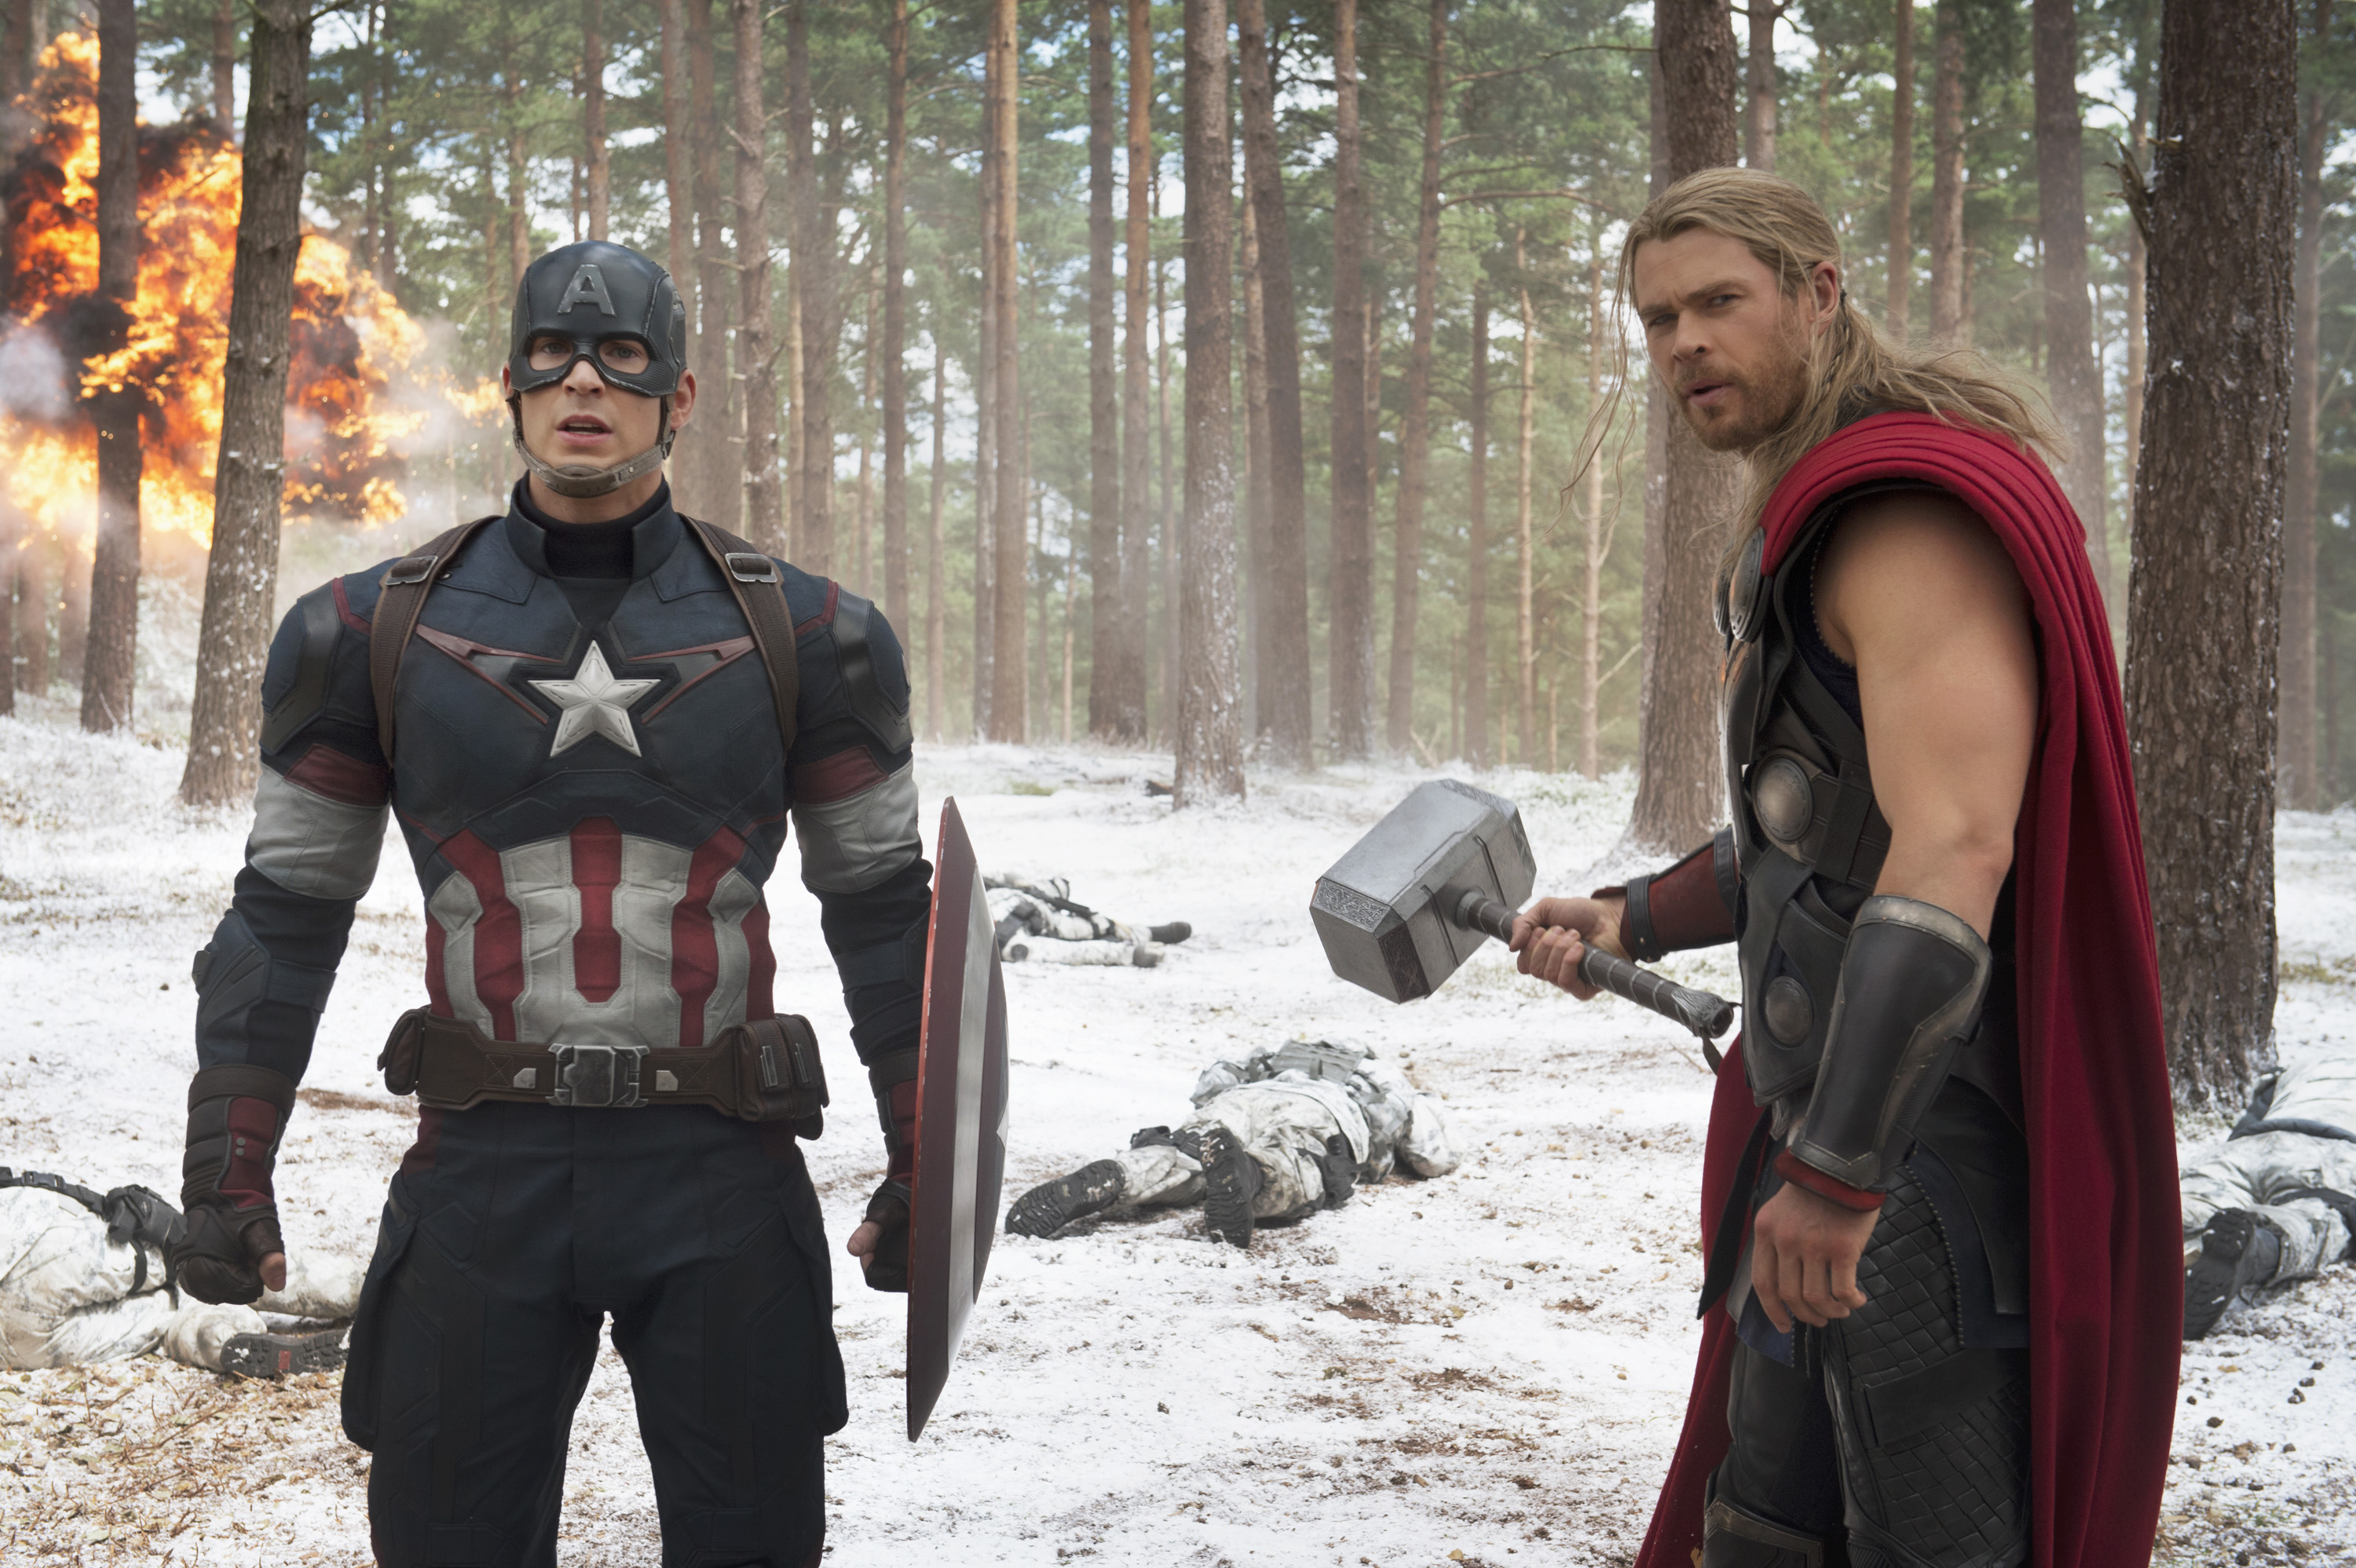 ‘Age of Ultron’ is a Hulk Smash with mixed results